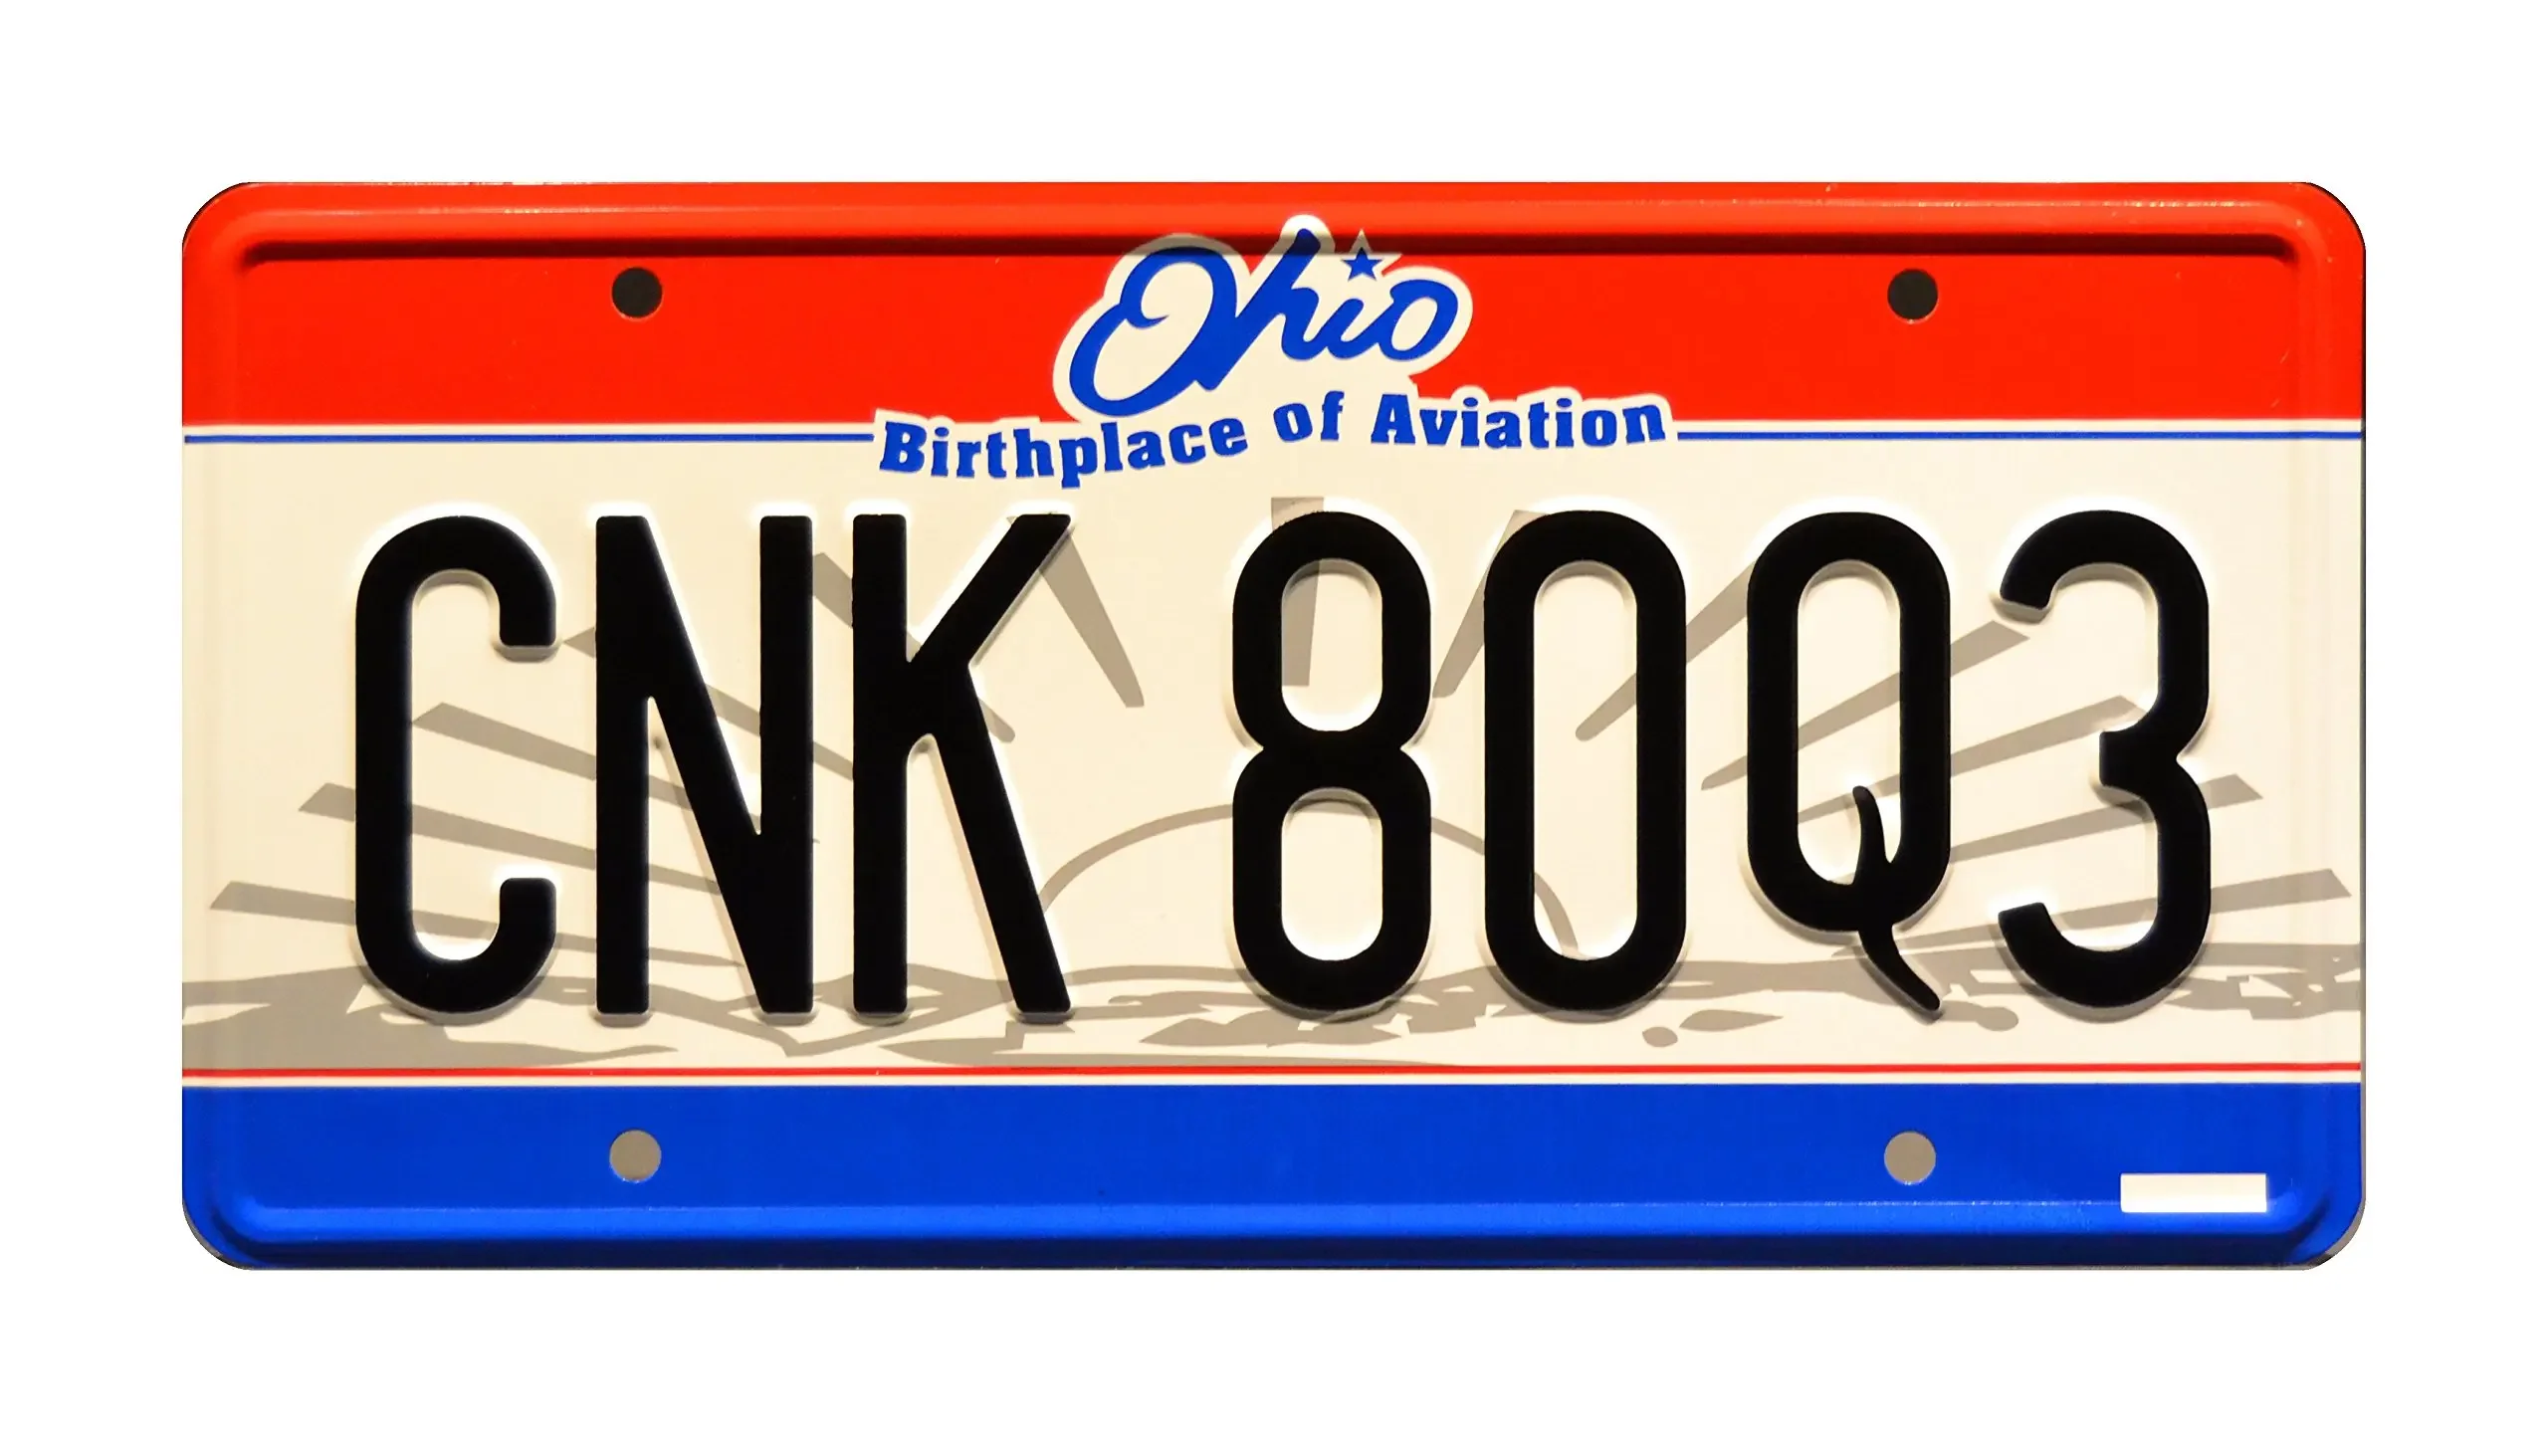 

Winchester Impala| CNK 80Q3 | Metal Stamped License -License Plate License Plate Frames Car Decor License